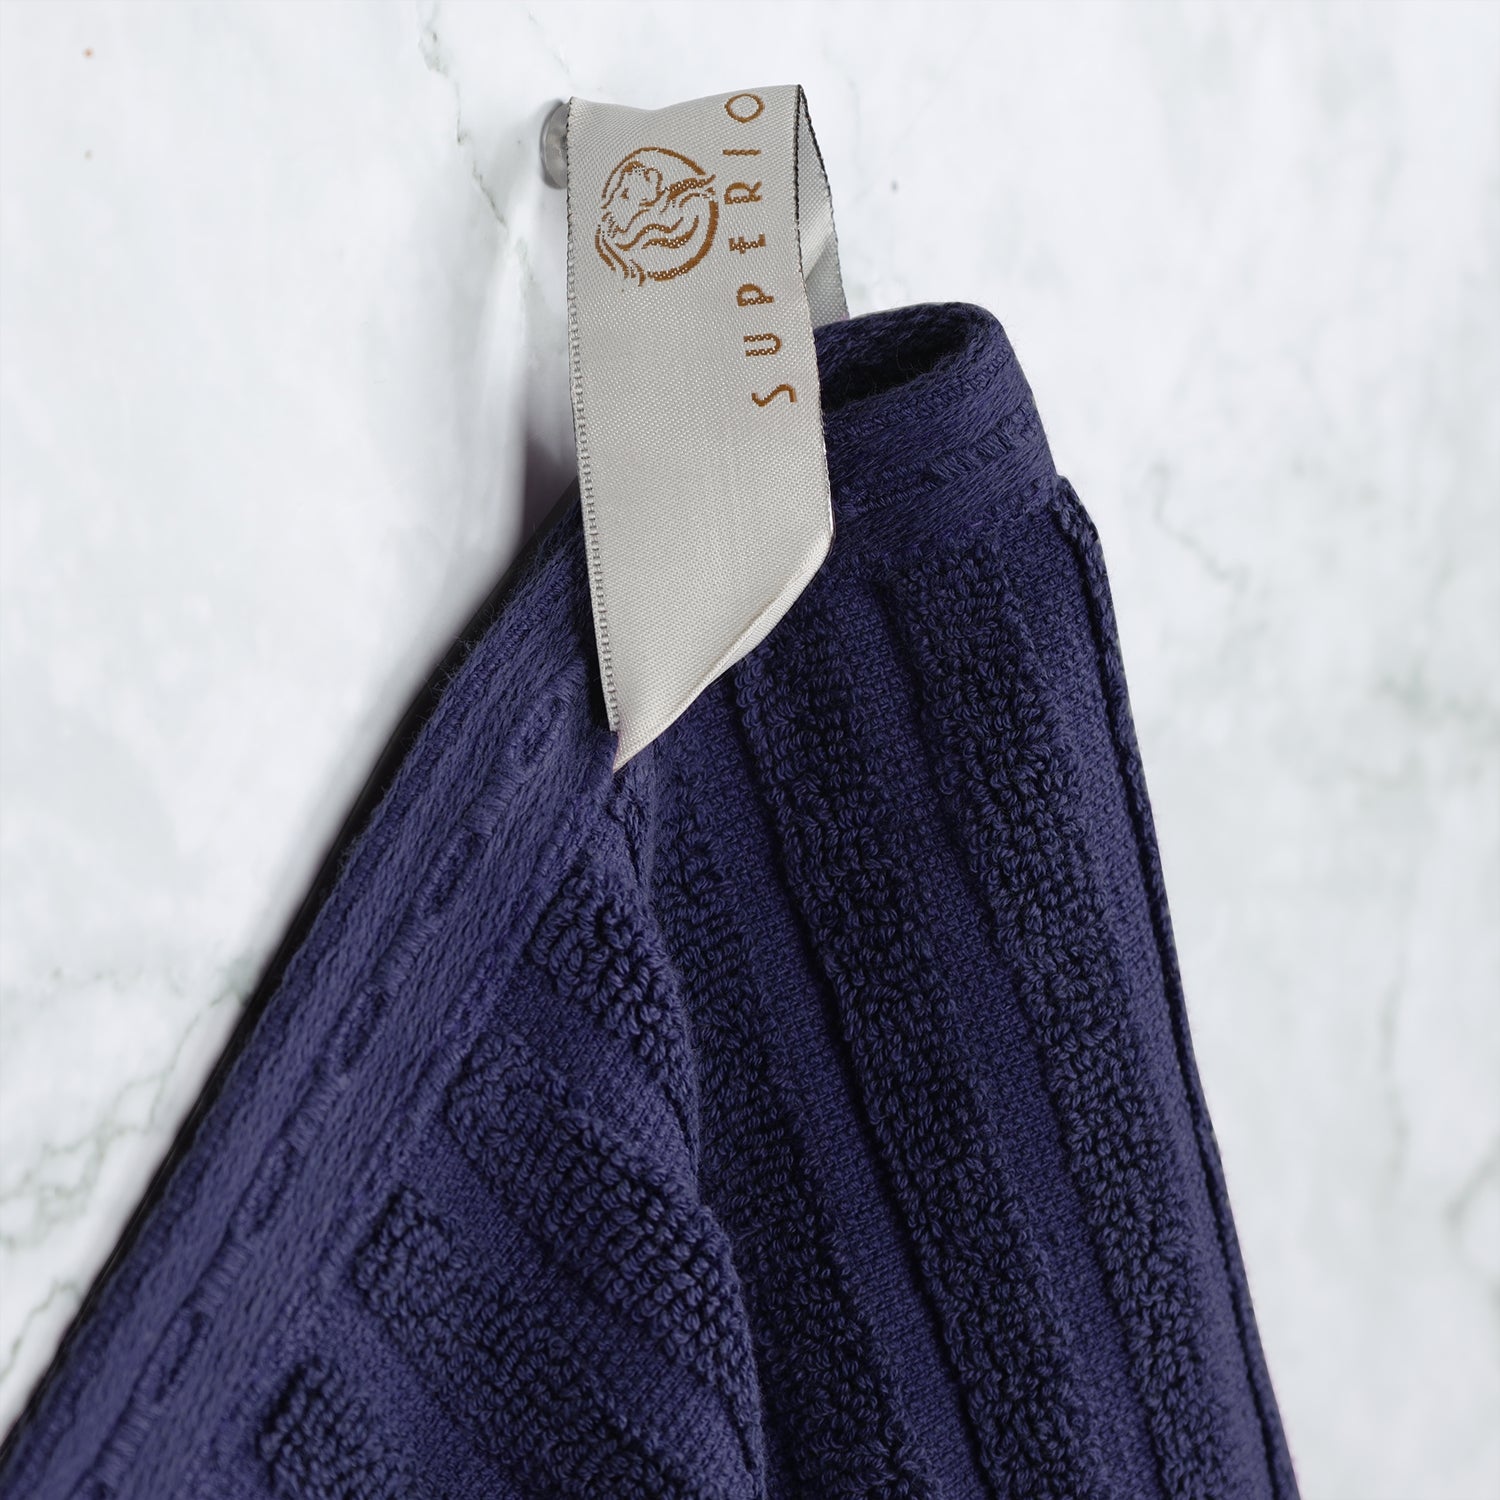 Superior Soho Ribbed Textured Cotton Ultra-Absorbent Hand and Bath Towel Set - Navy Blue